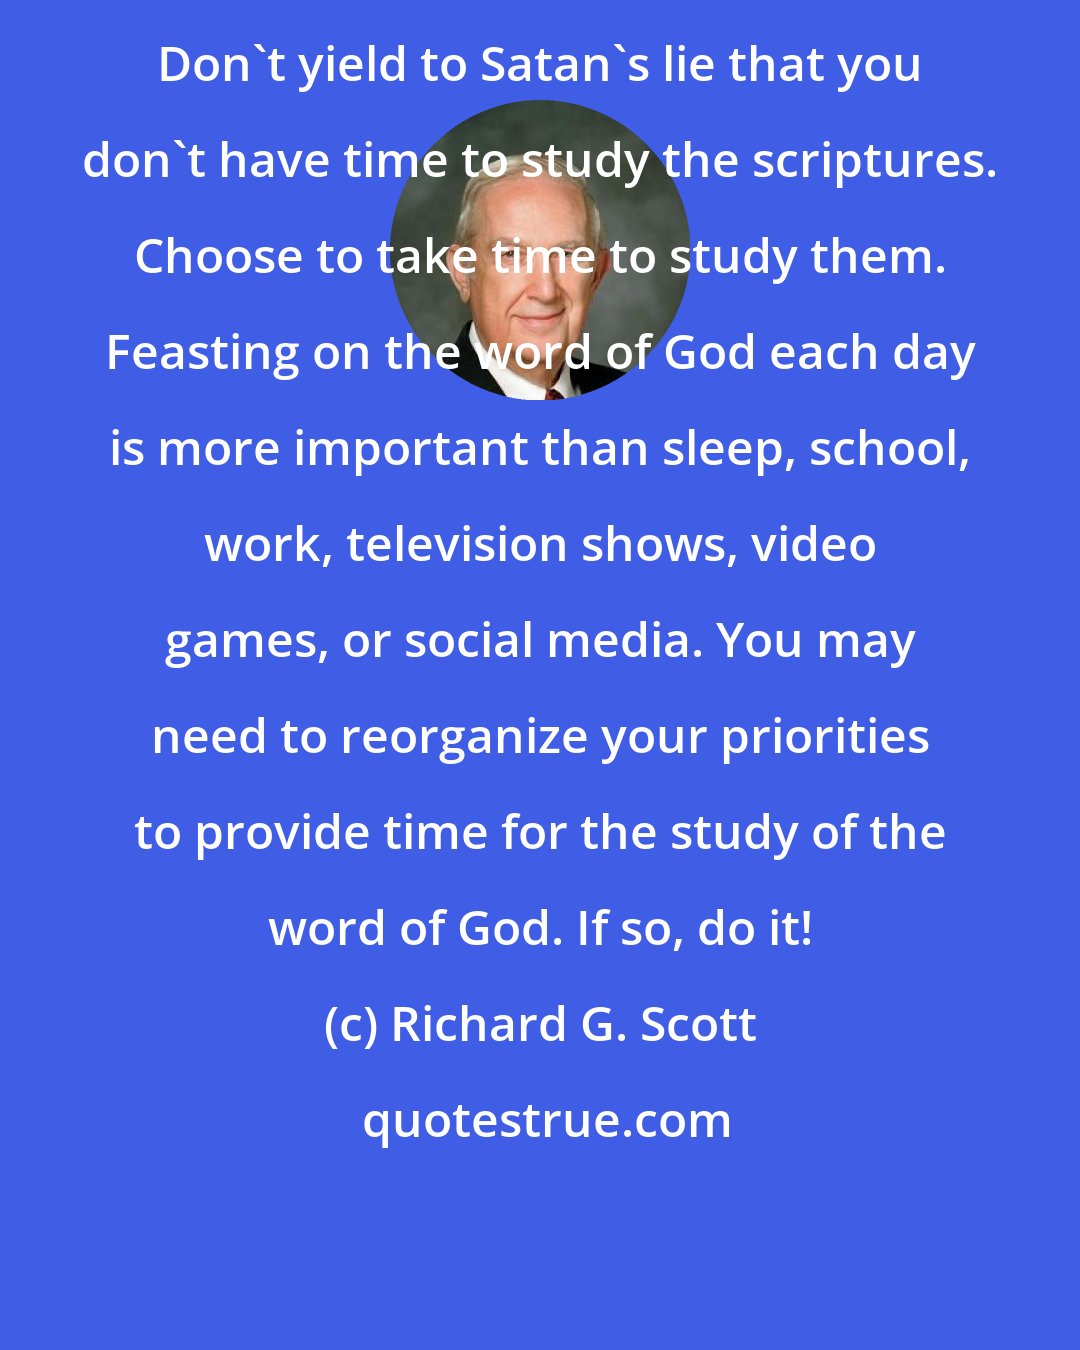 Richard G. Scott: Don't yield to Satan's lie that you don't have time to study the scriptures. Choose to take time to study them. Feasting on the word of God each day is more important than sleep, school, work, television shows, video games, or social media. You may need to reorganize your priorities to provide time for the study of the word of God. If so, do it!